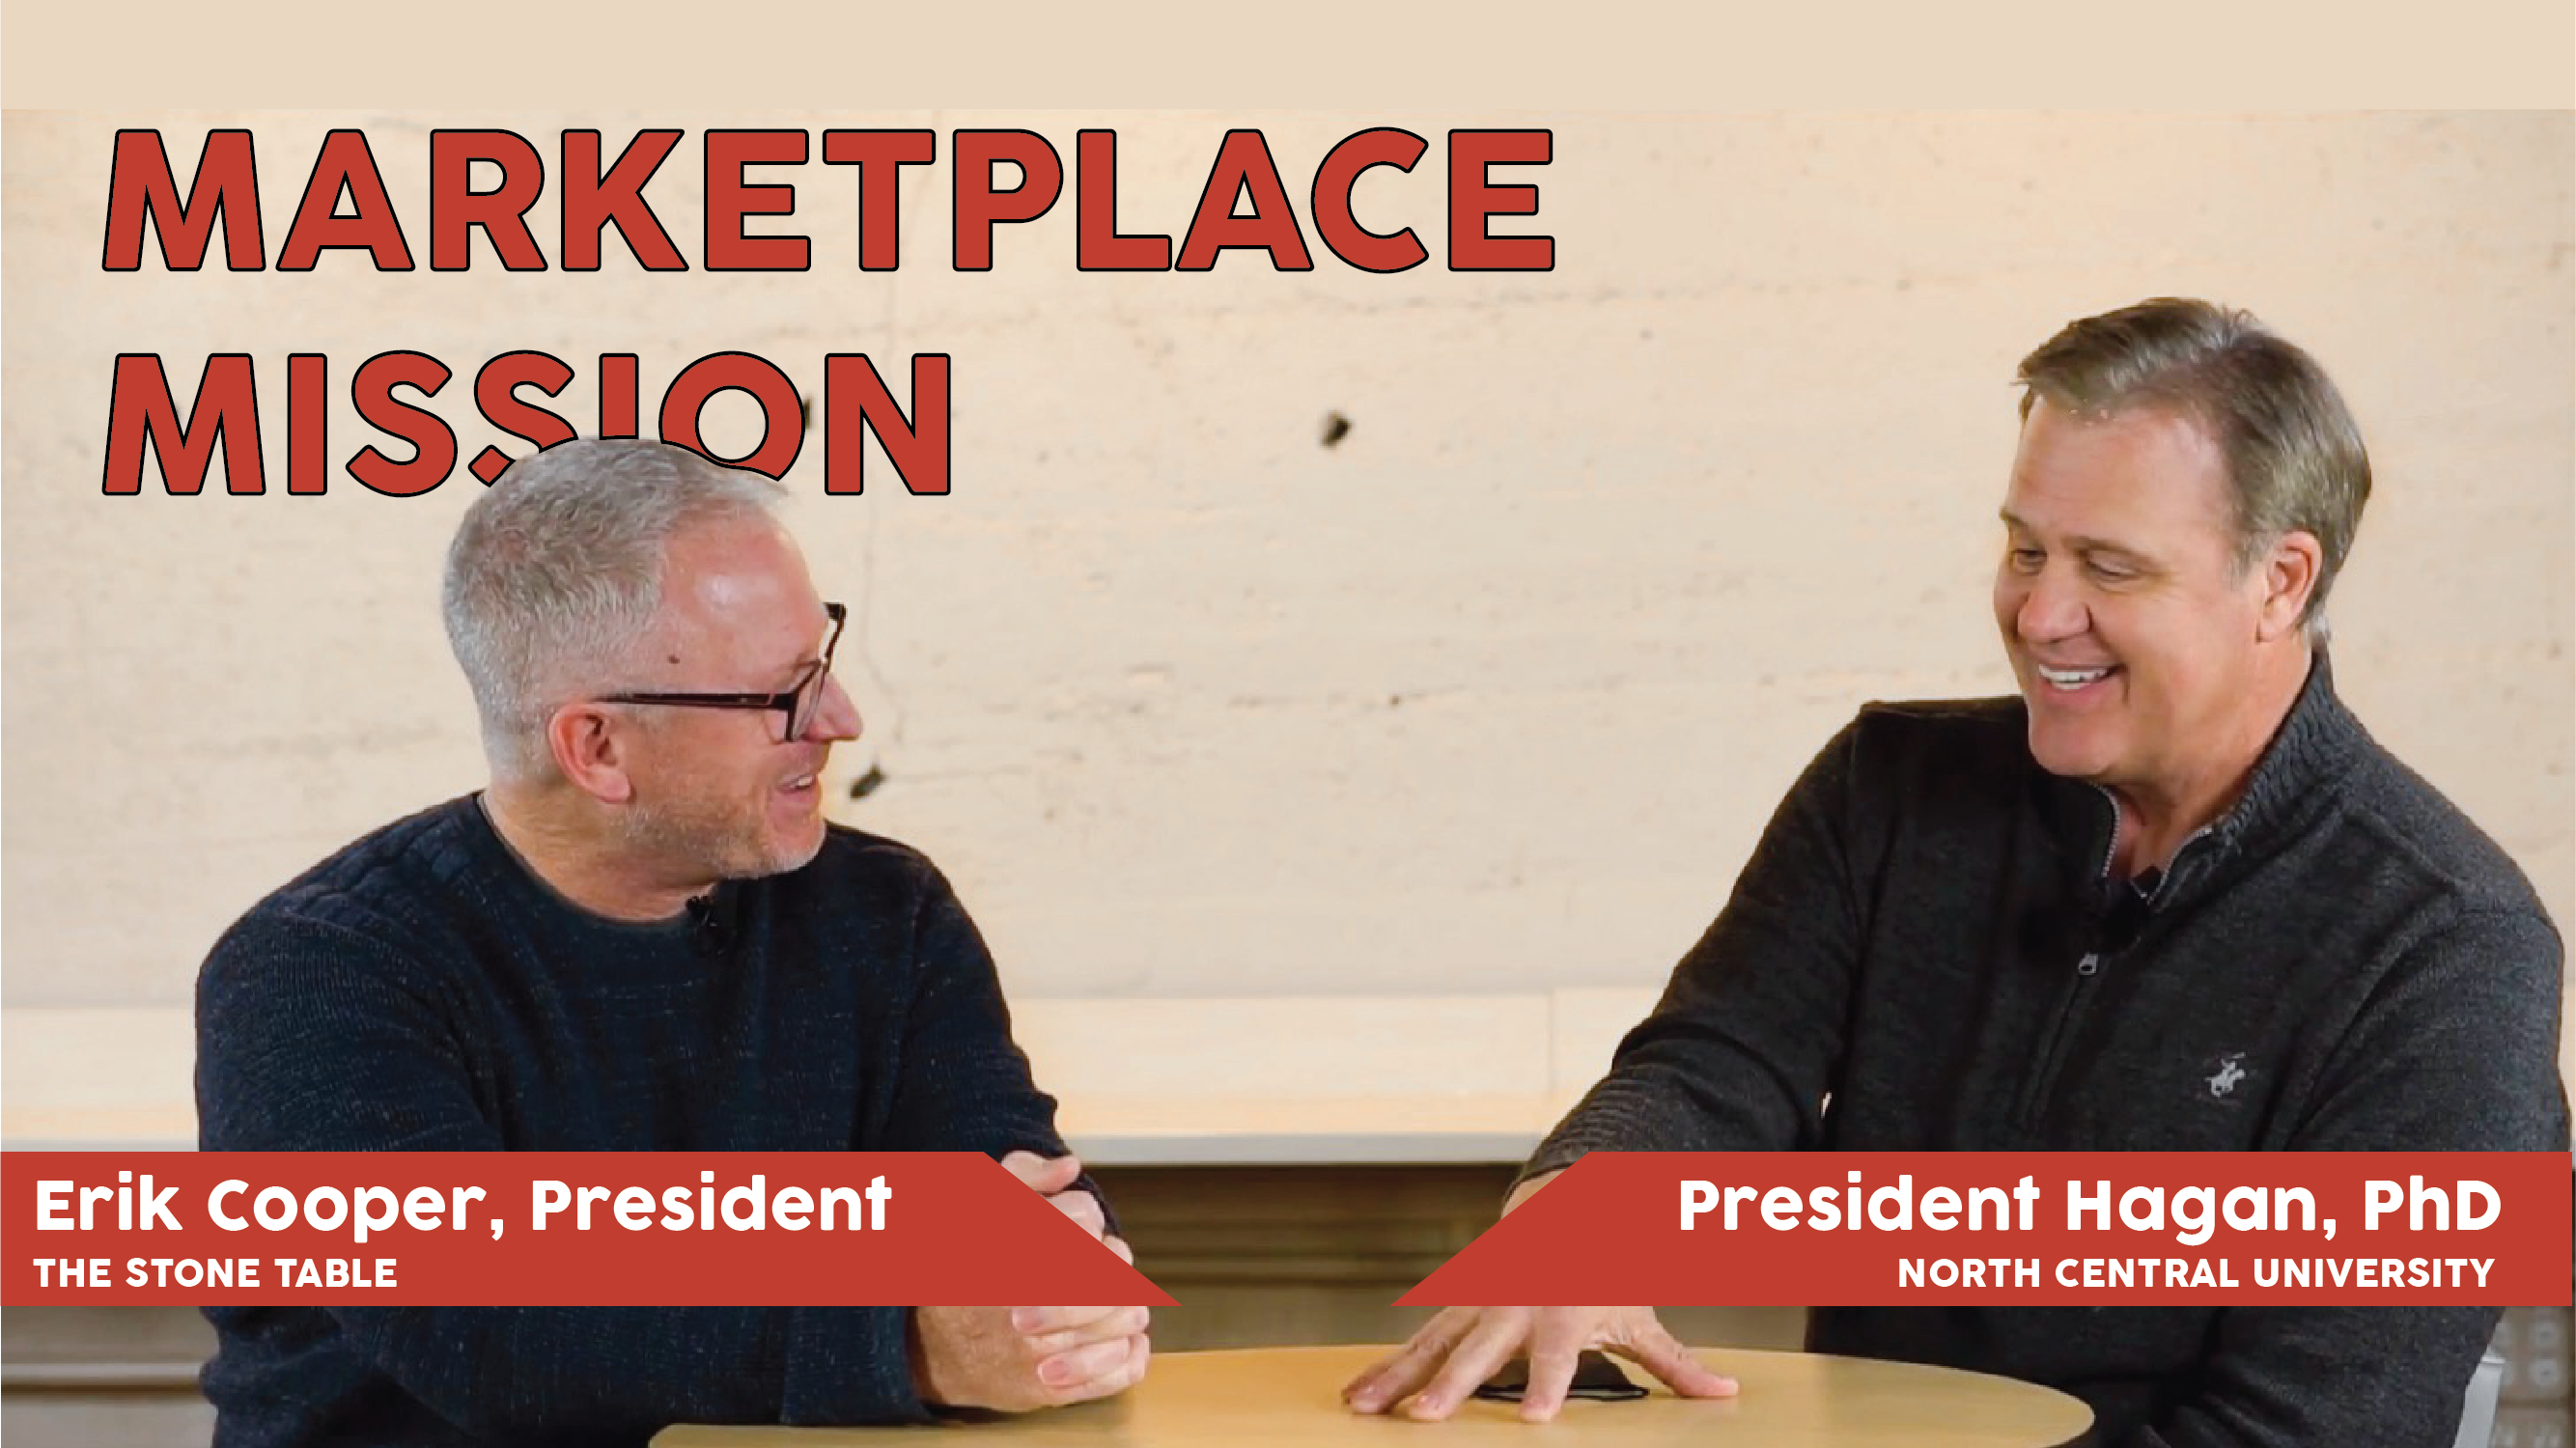 VIDEO: Marketplace Mission with President Hagan